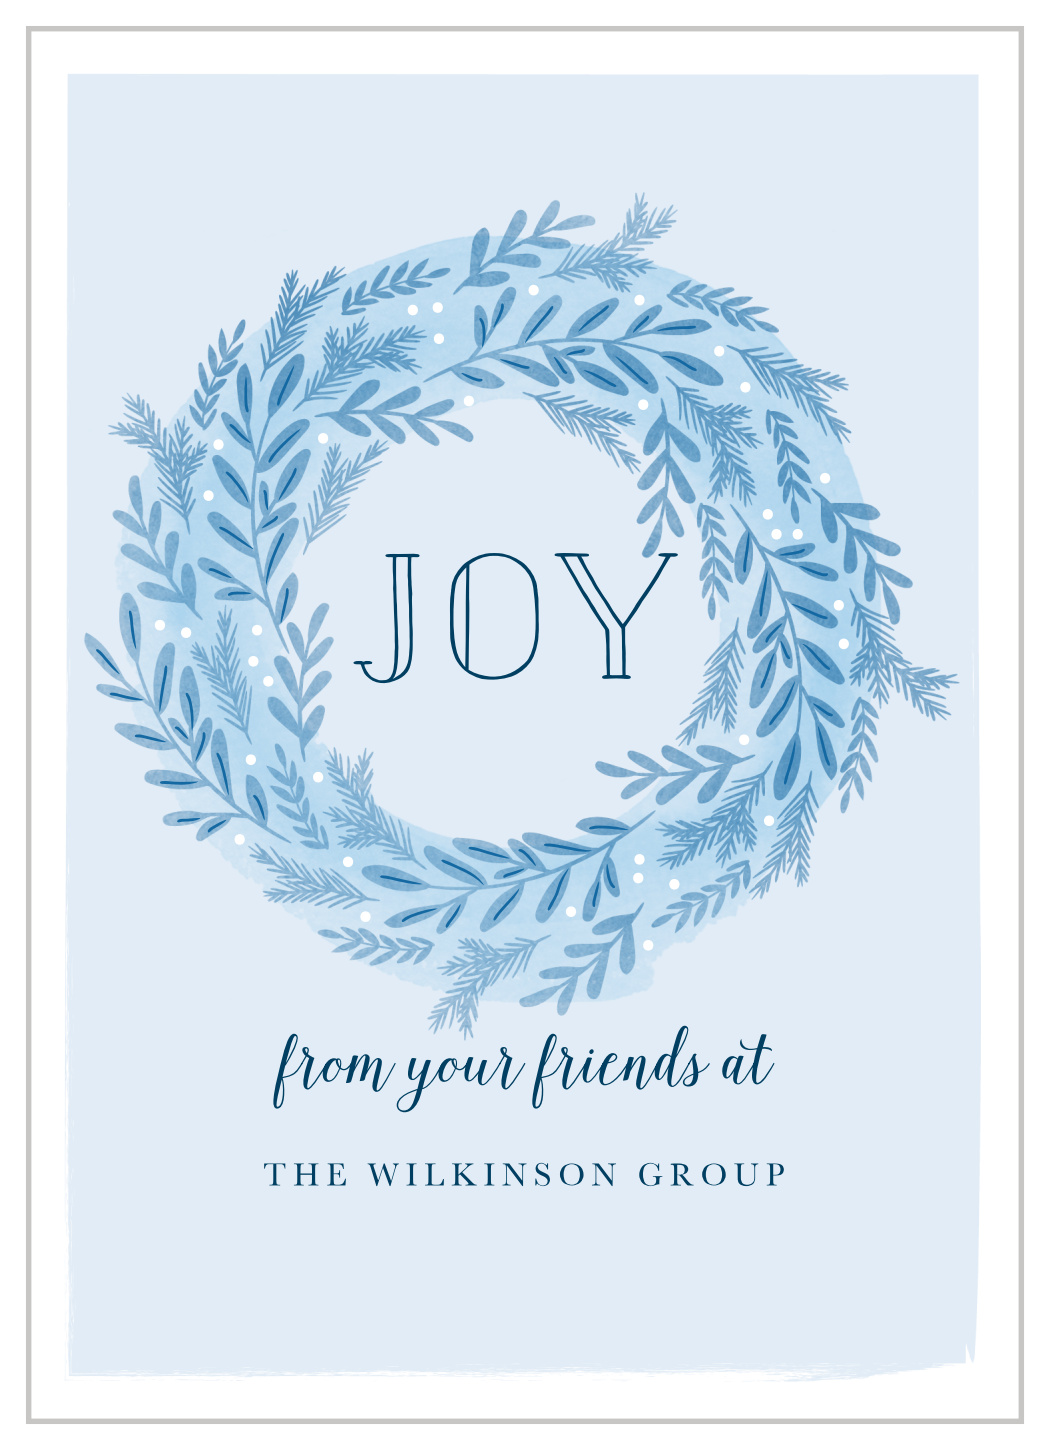 Painted Wreath Corporate Holiday Cards